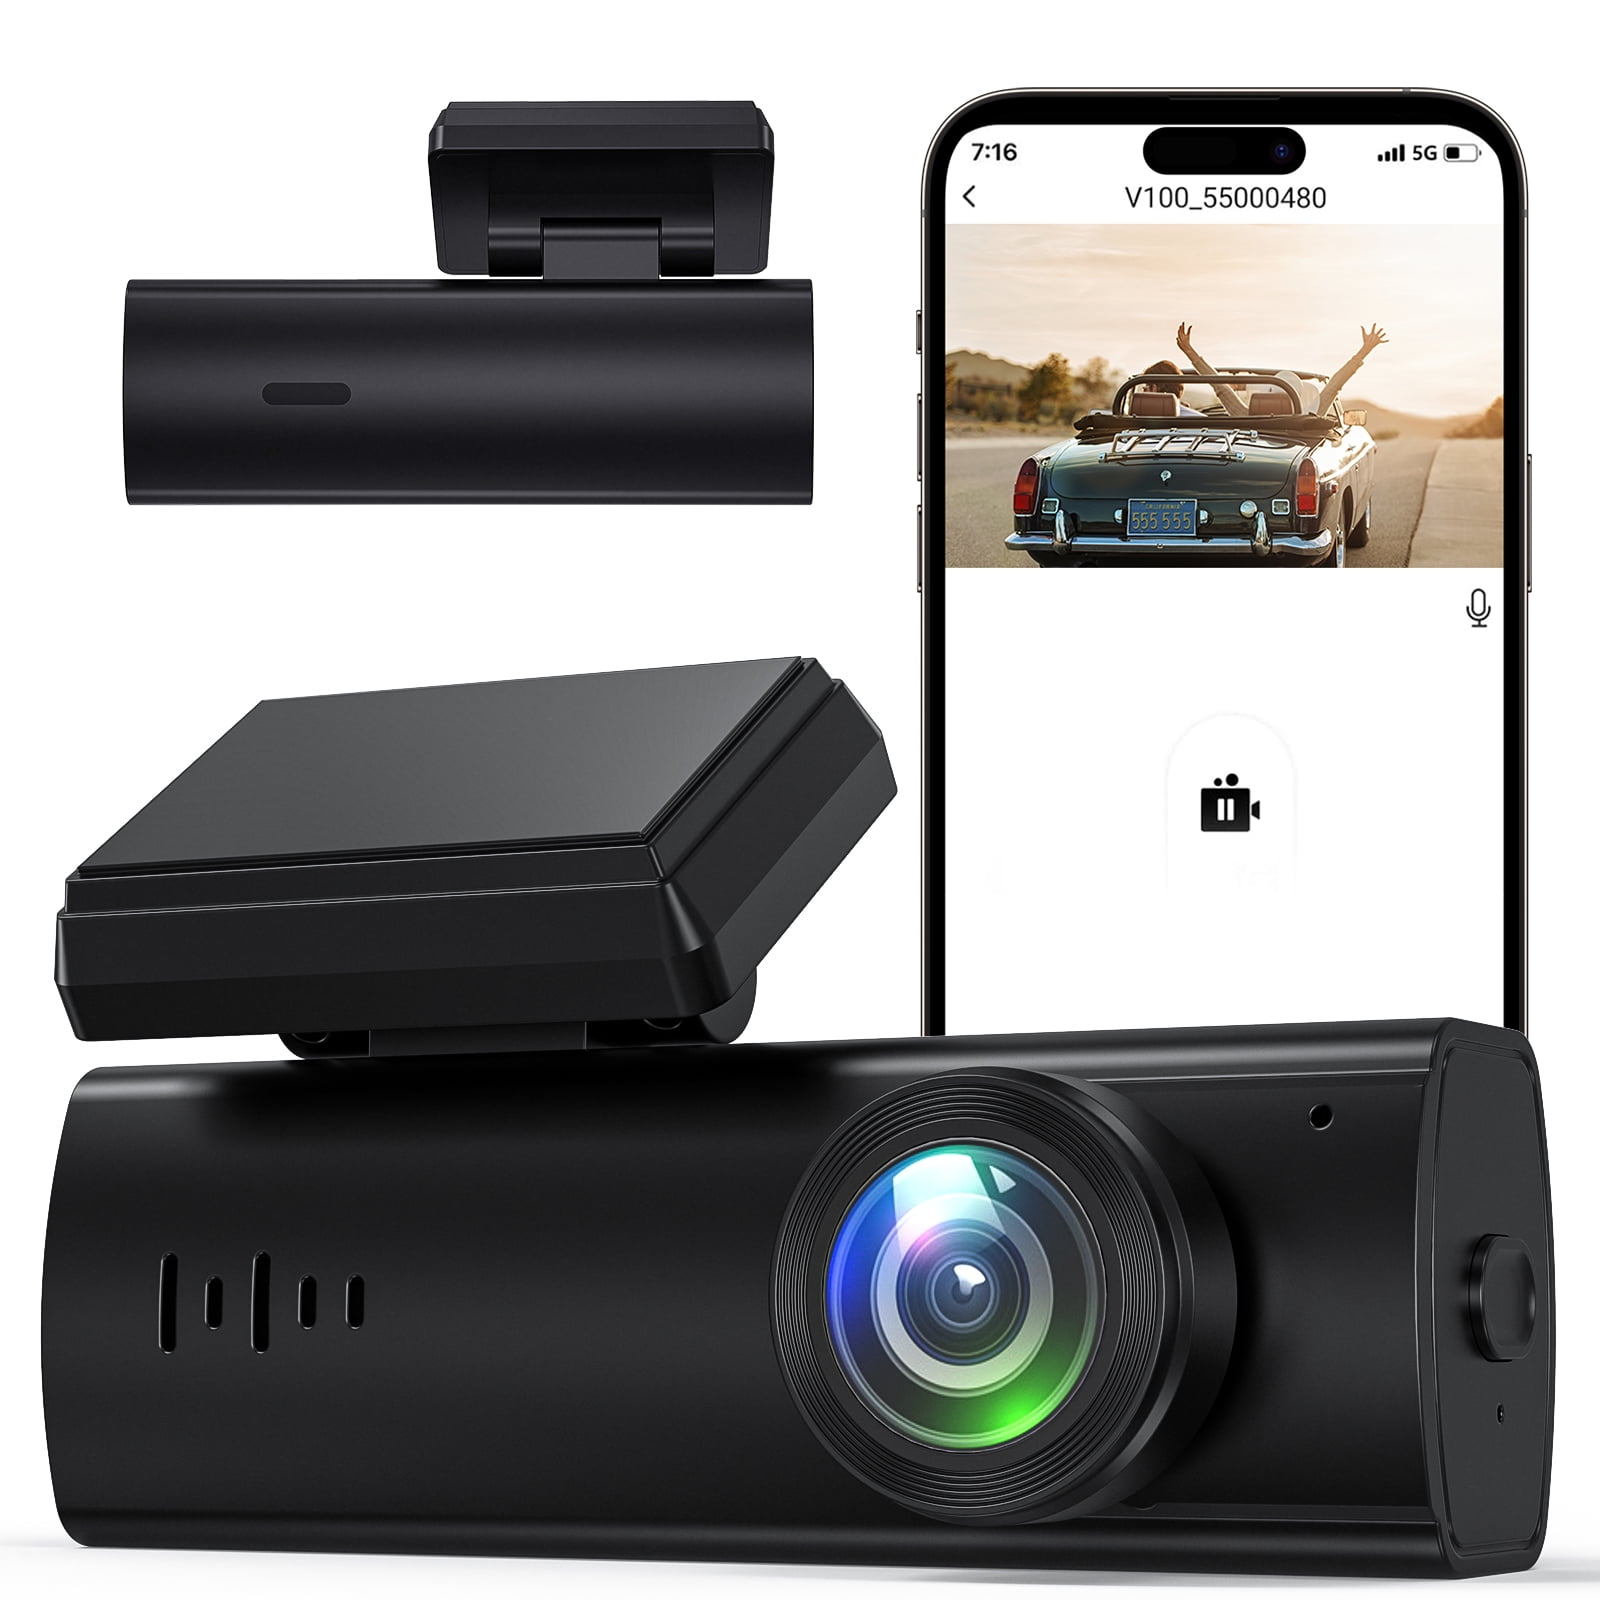 Campark DC15 4K+ 2K Front and Rear Dash Camera for Cars Built in WiFi GPS with 3.16 Touch Screen, 64gb Memory Card (Out of Stock in Europe)